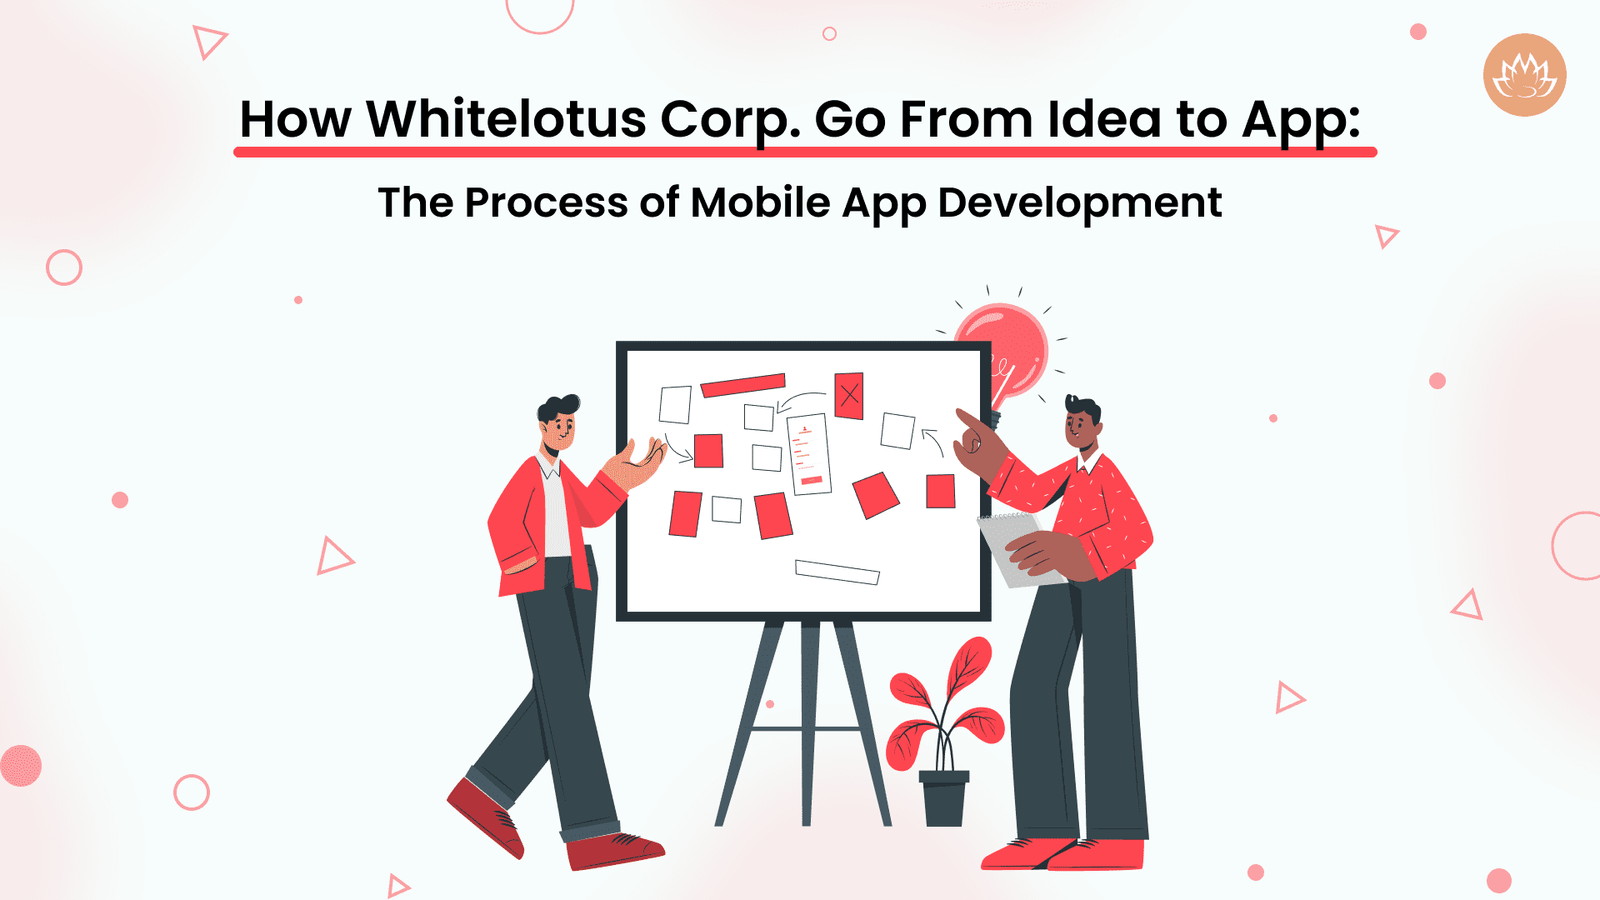 How Whitelotus Corp. Go From Idea to App_ The Process of Mobile App Development